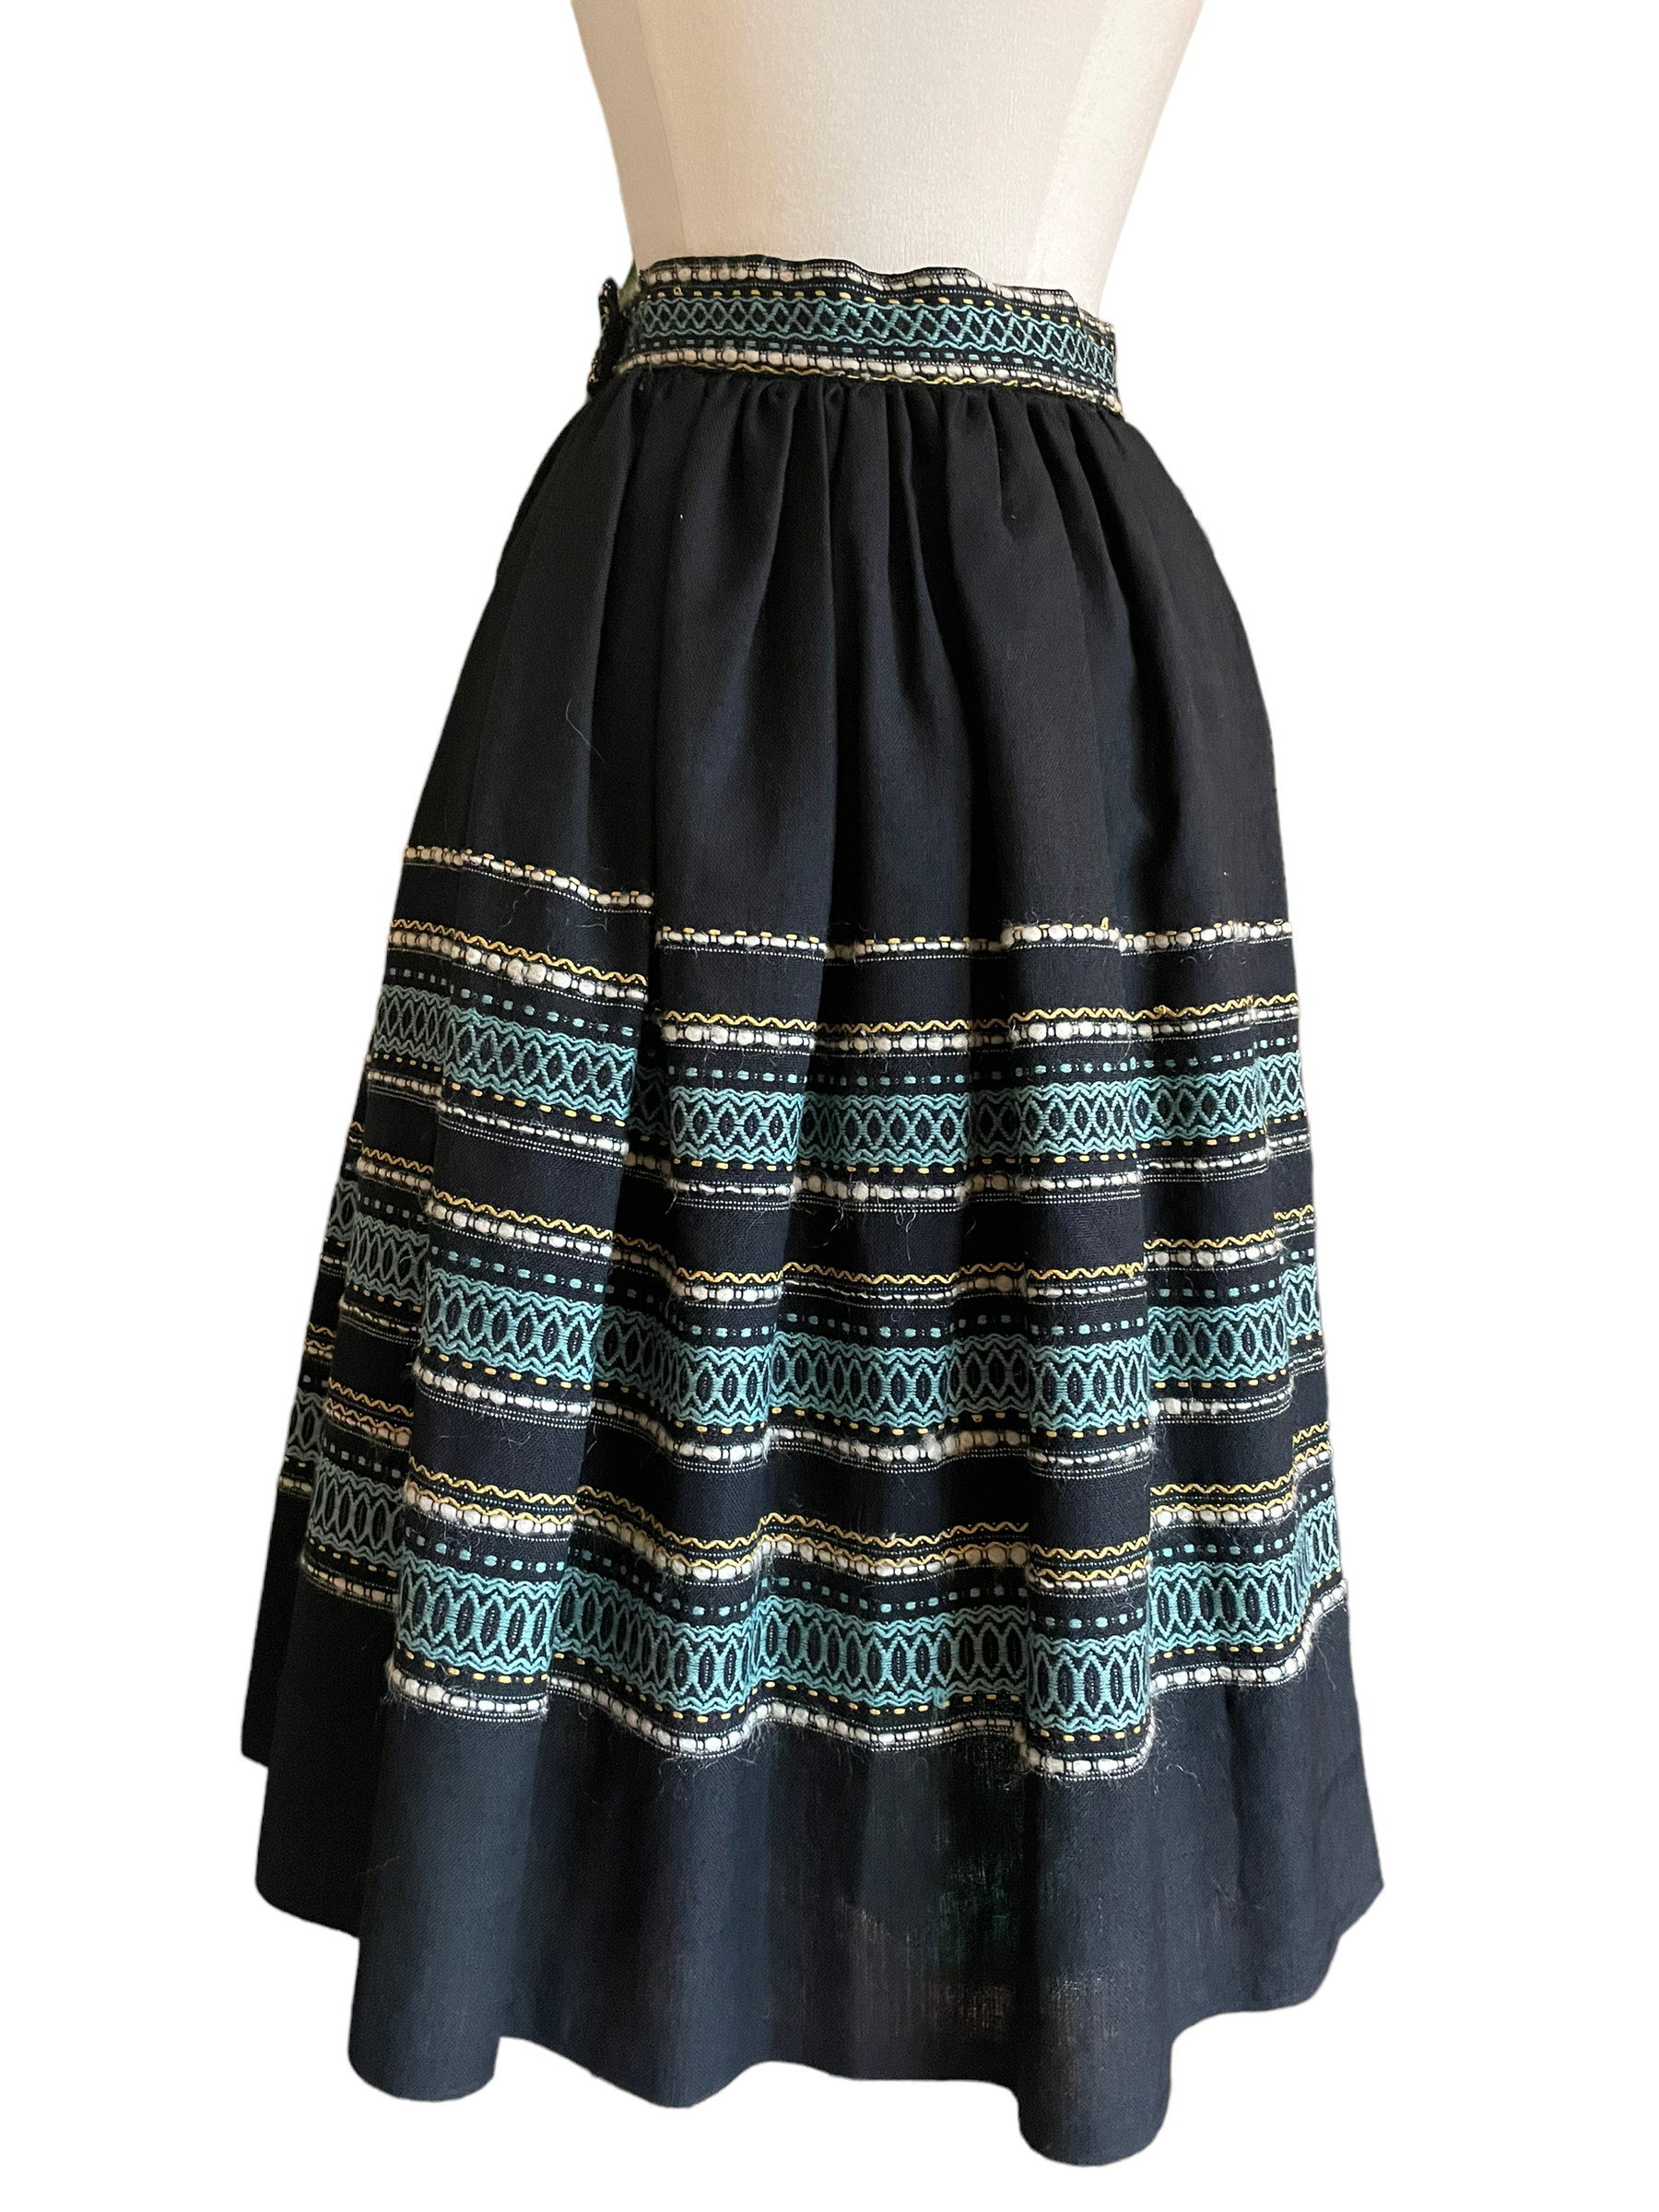 Back view view Vintage 1950s Embroidered Guatemalan Skirt | Barn Owl Seattle | Vintage Guatemalan Skirts